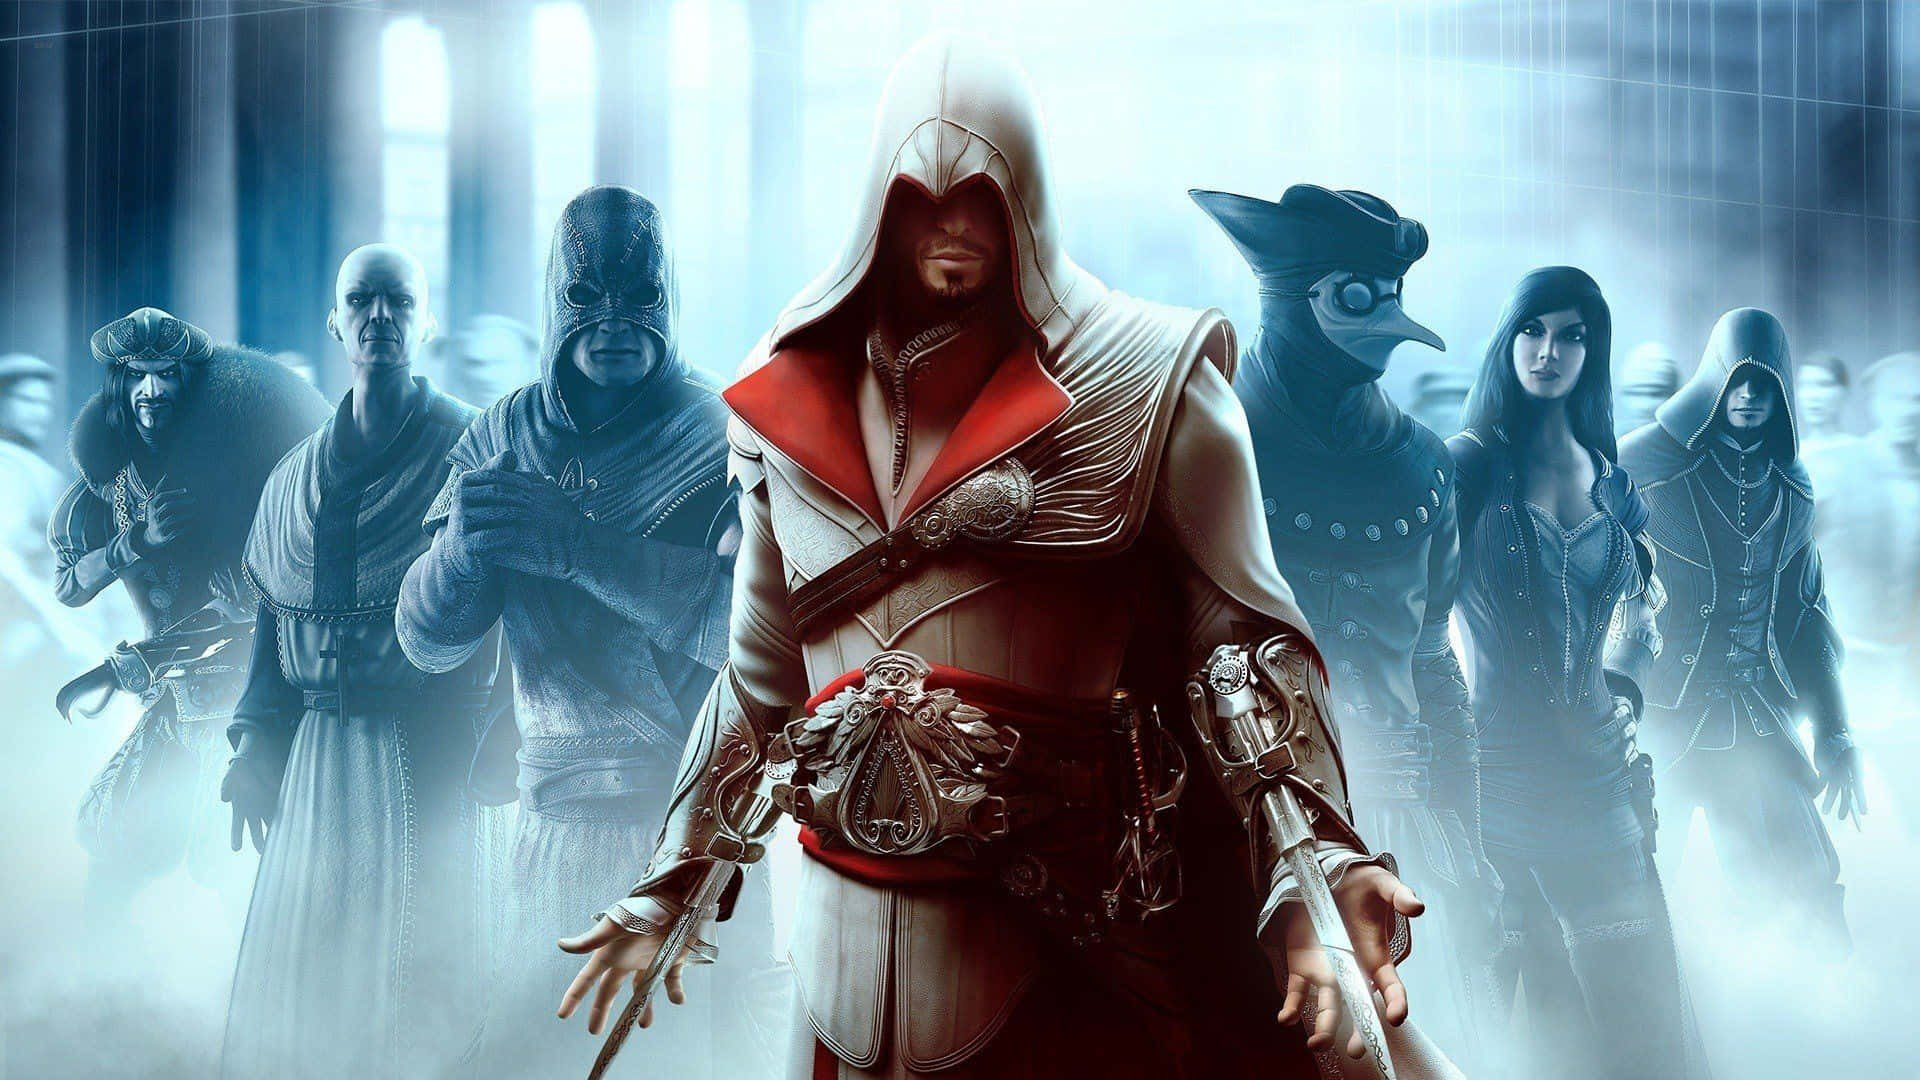 Ezio Auditore, Master Assassin from the Assassin's Creed series Wallpaper